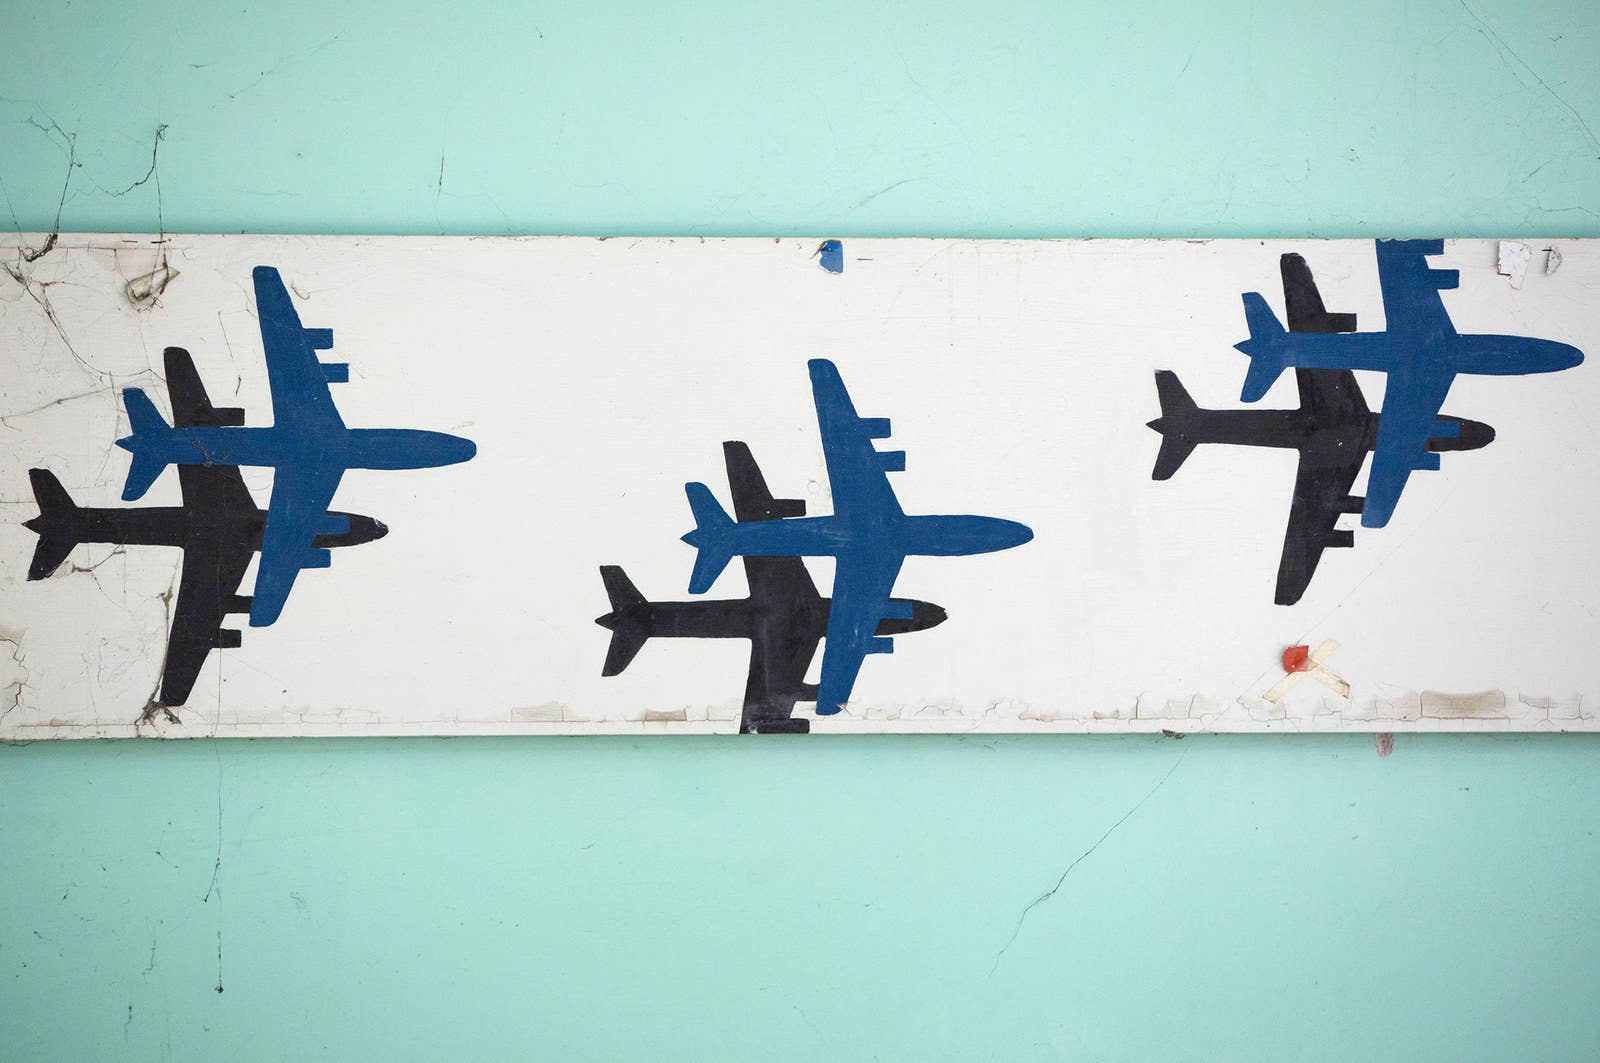 Images of airplanes decorate a wall.